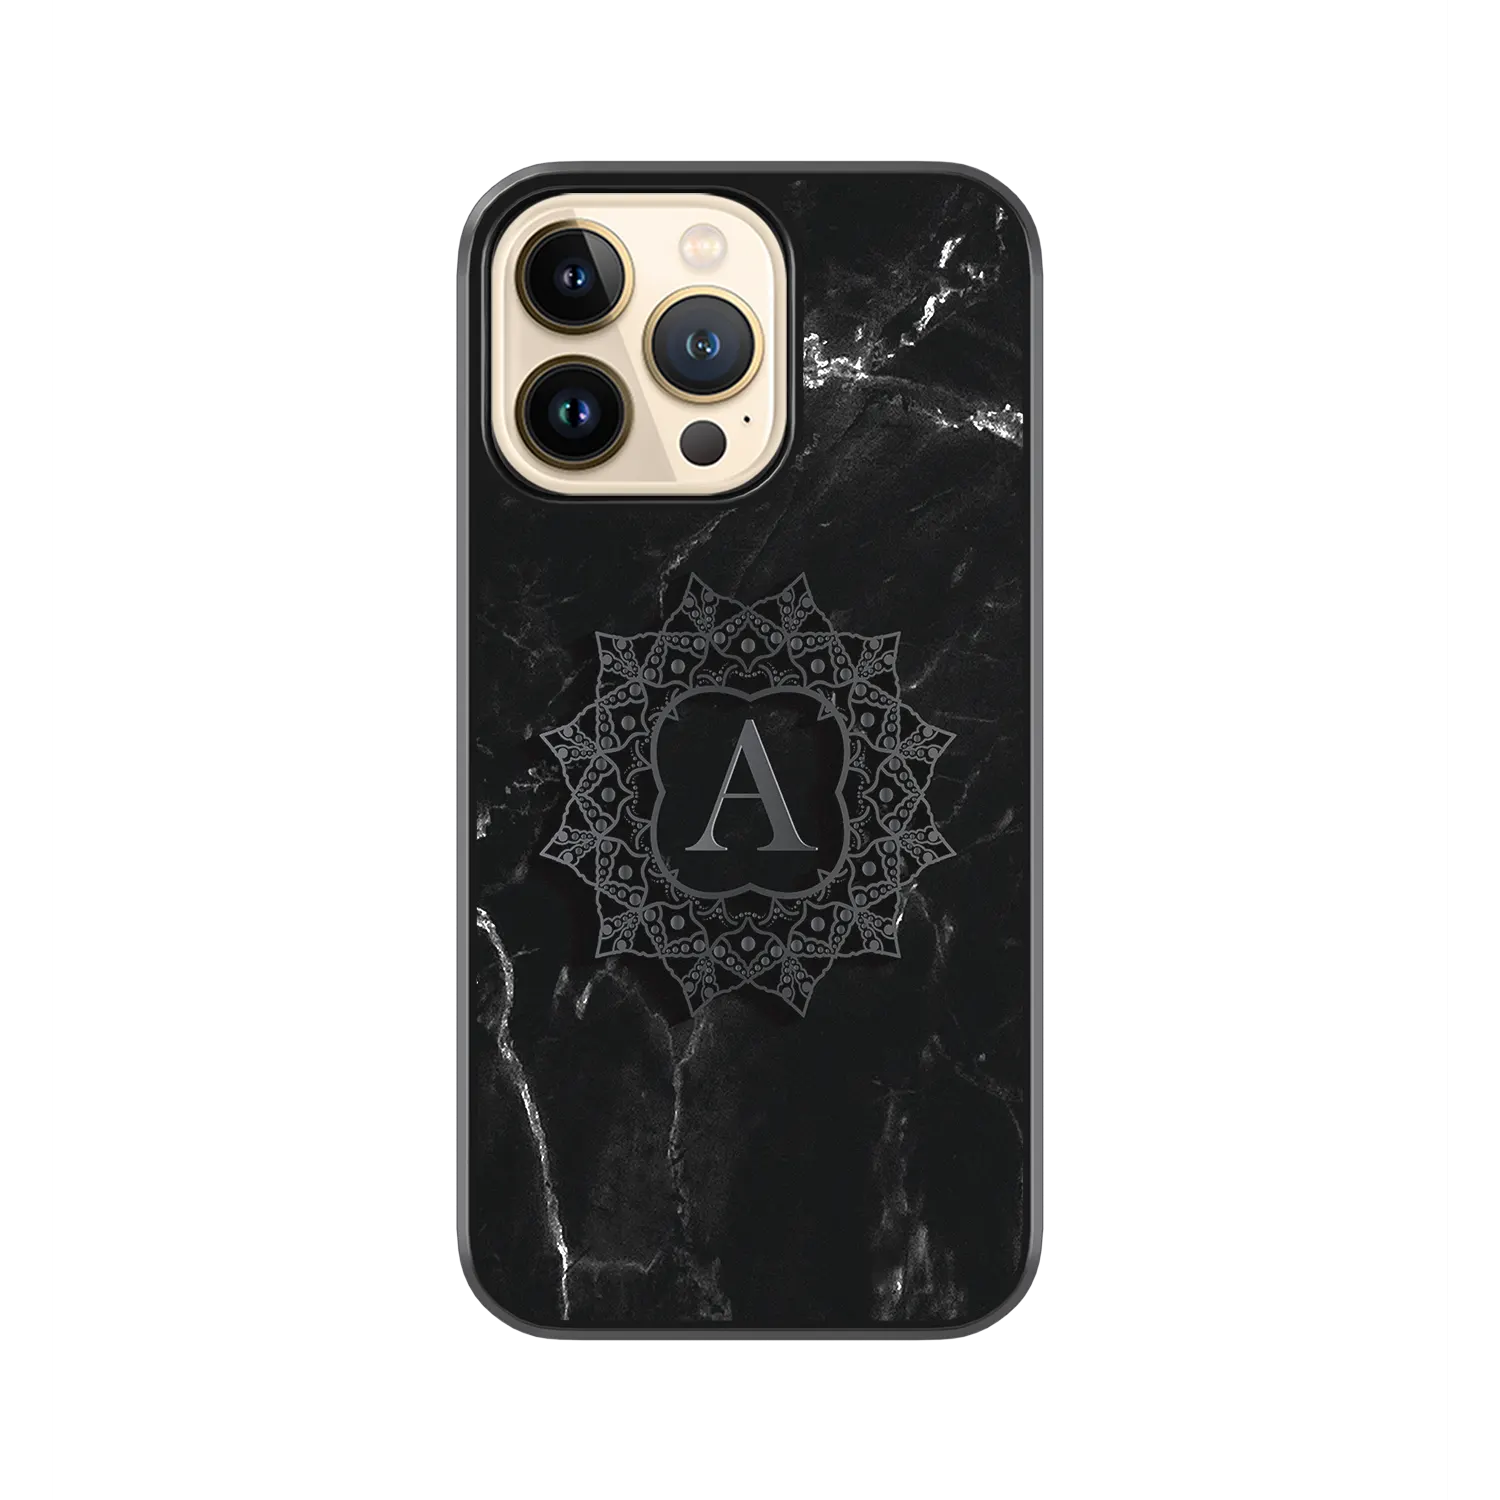 Achlys iphone 12 pro cover